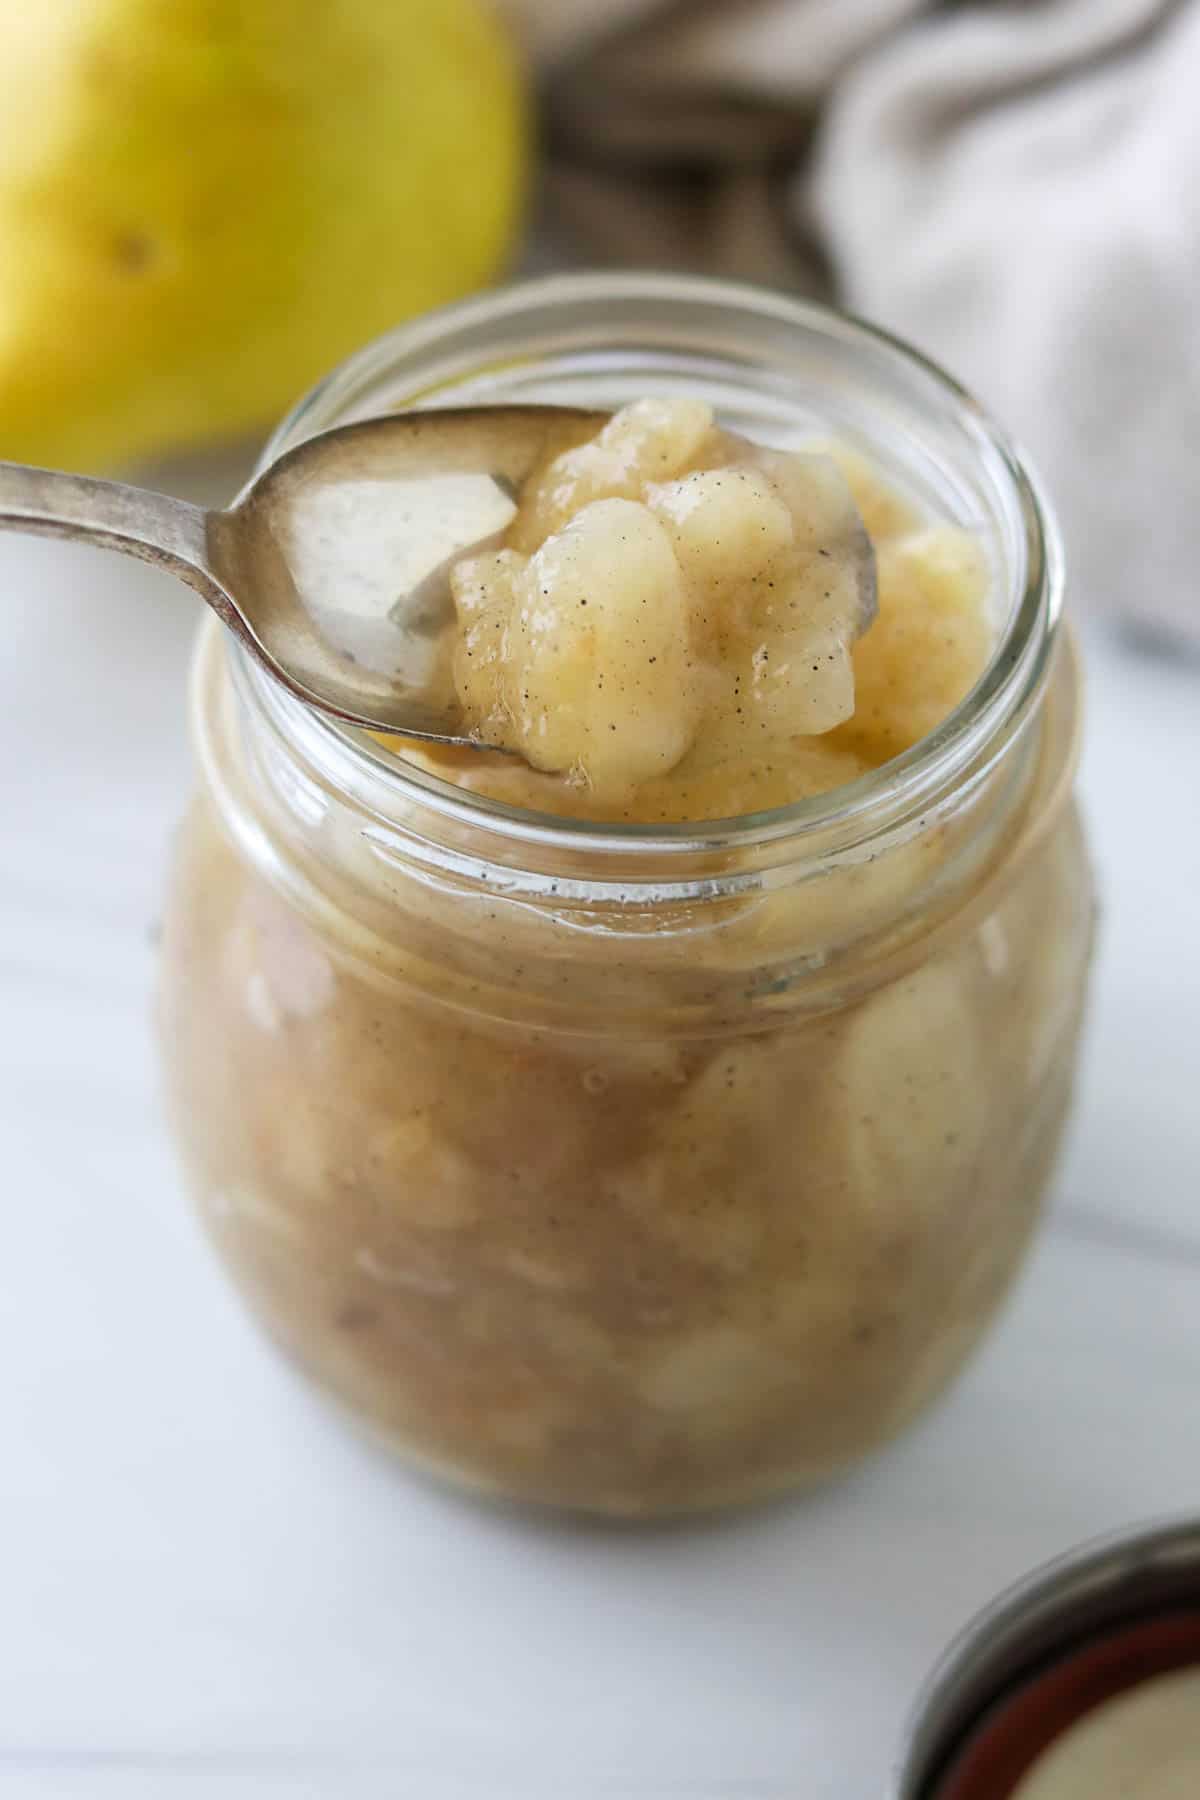 Spoonful of pear compote over a jar of it.